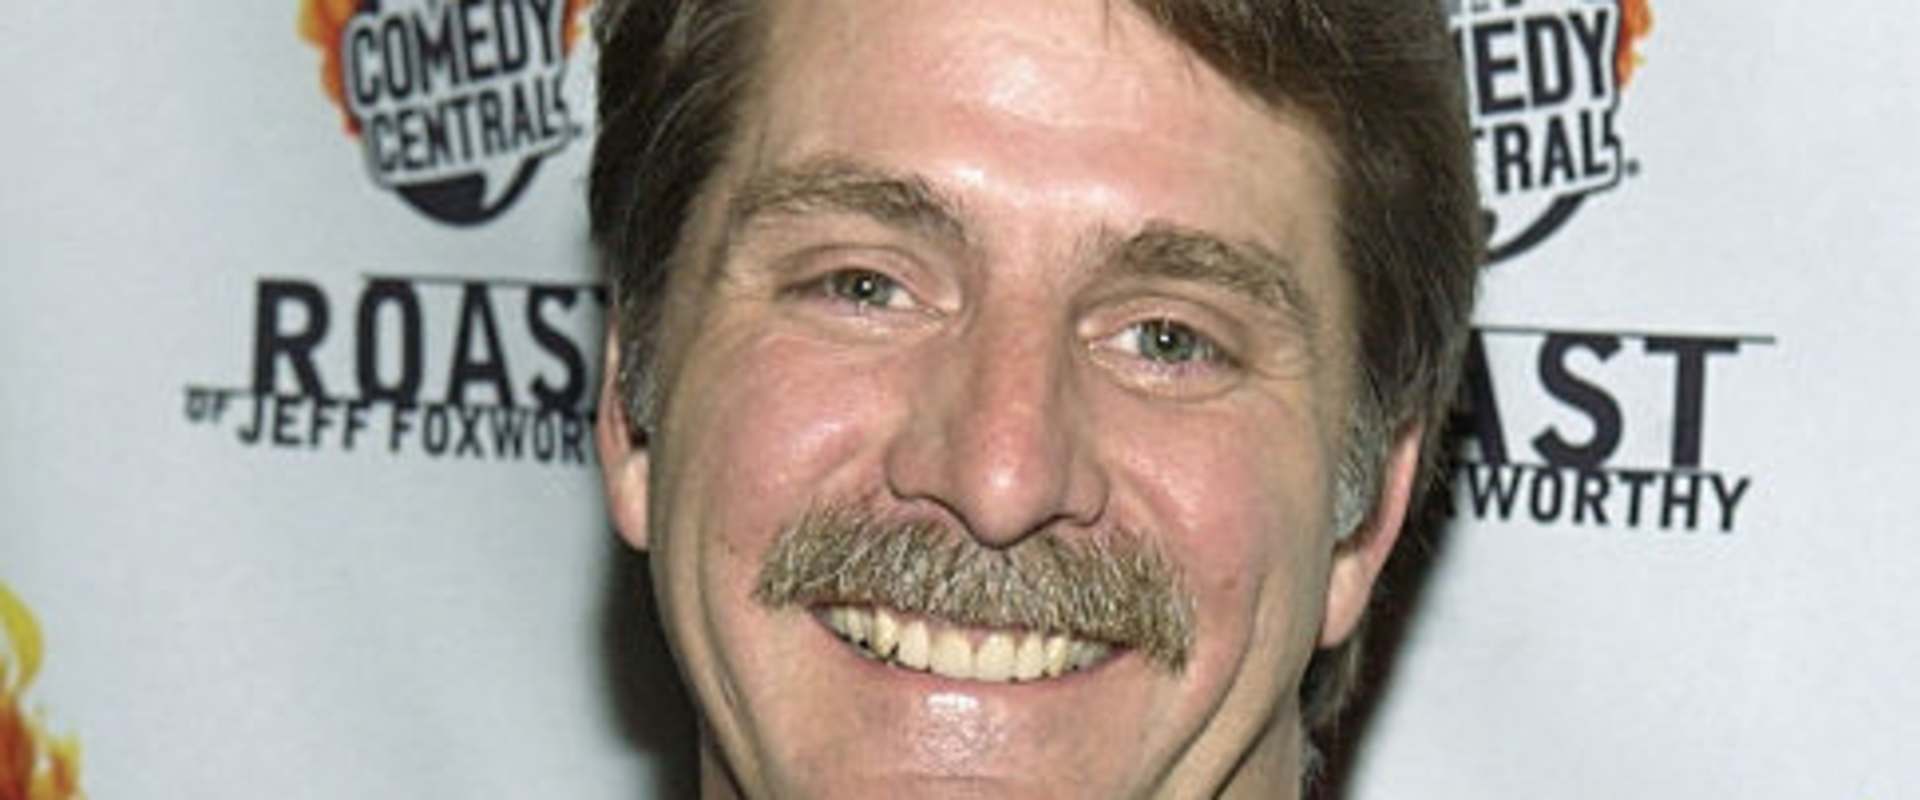 Comedy Central Roast of Jeff Foxworthy background 2